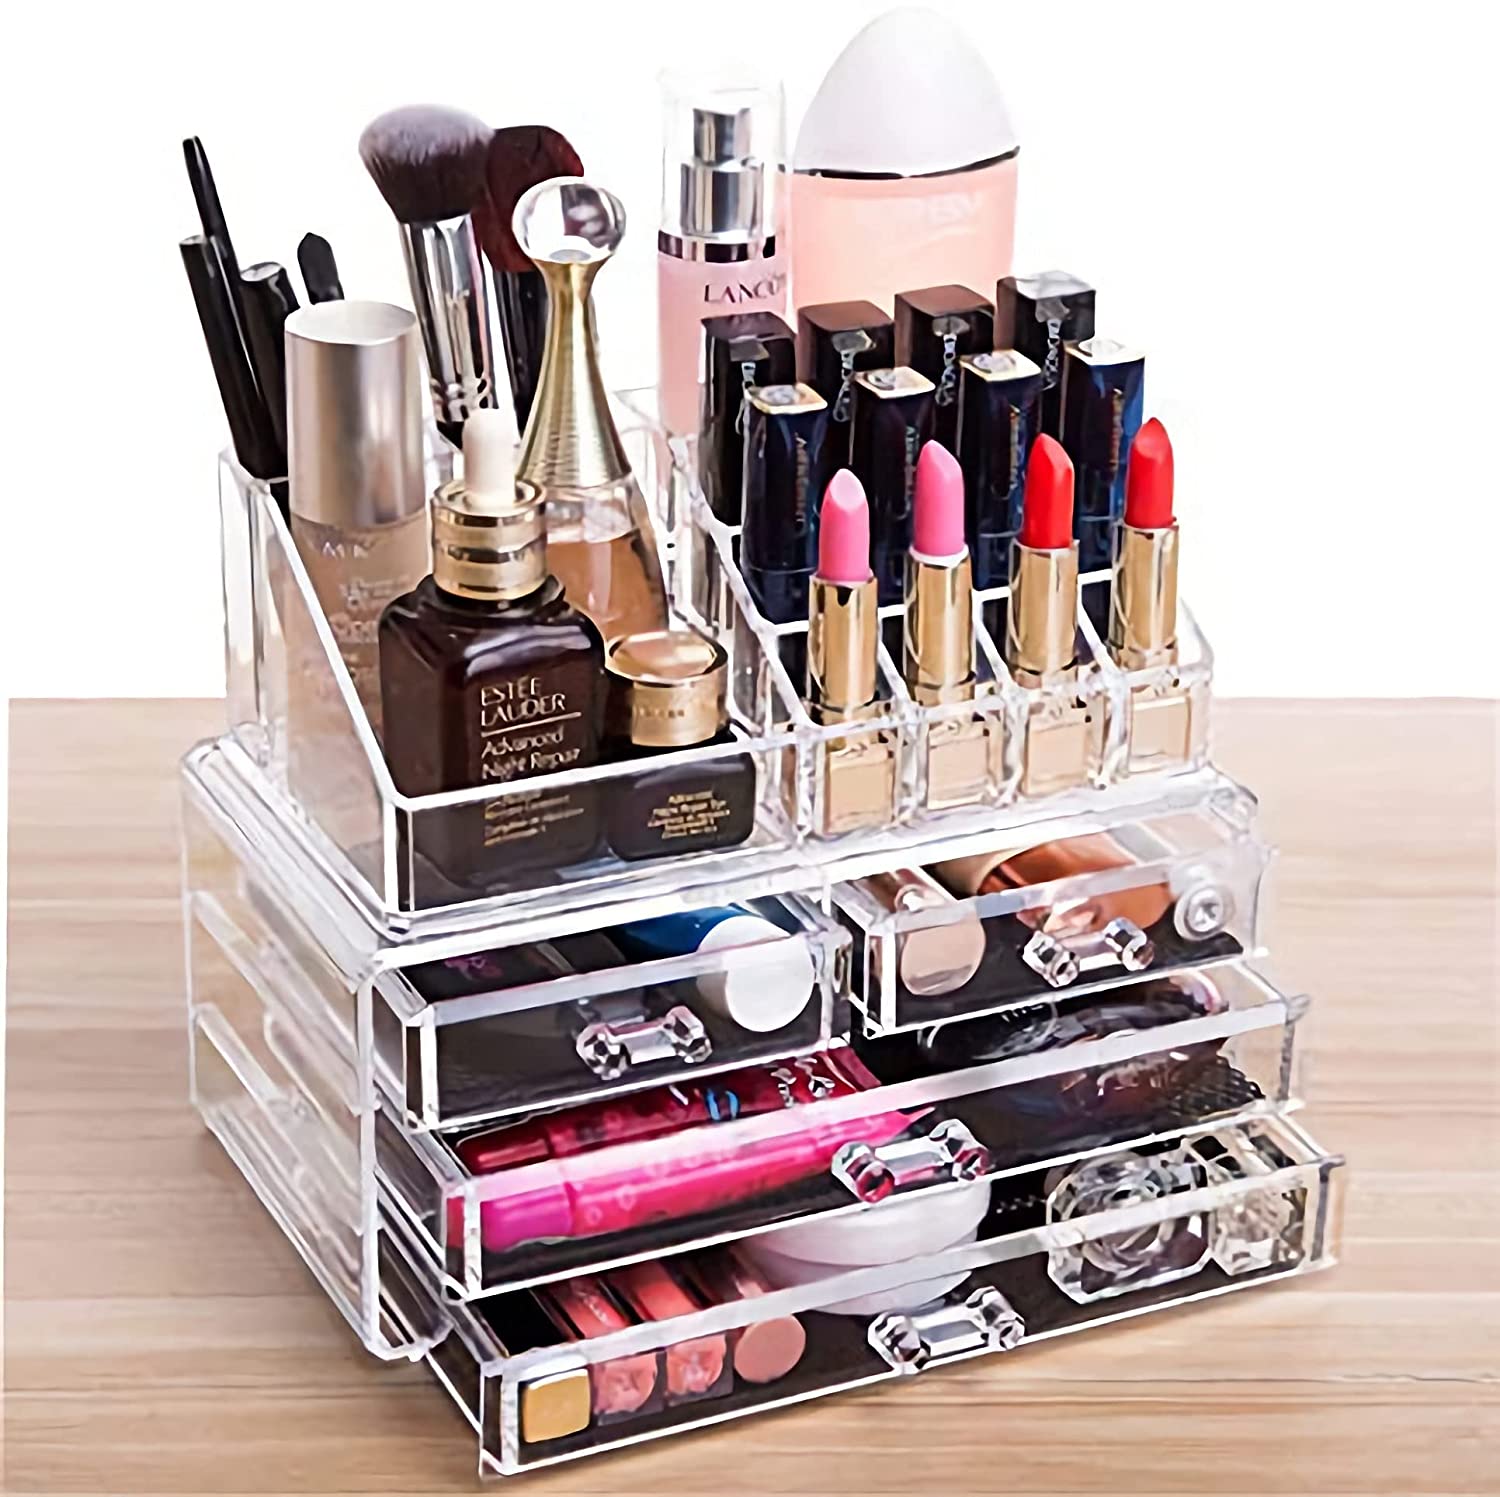 Cq acrylic Clear Makeup Organizer And Storage Stackable Skin Care Displ | eBay